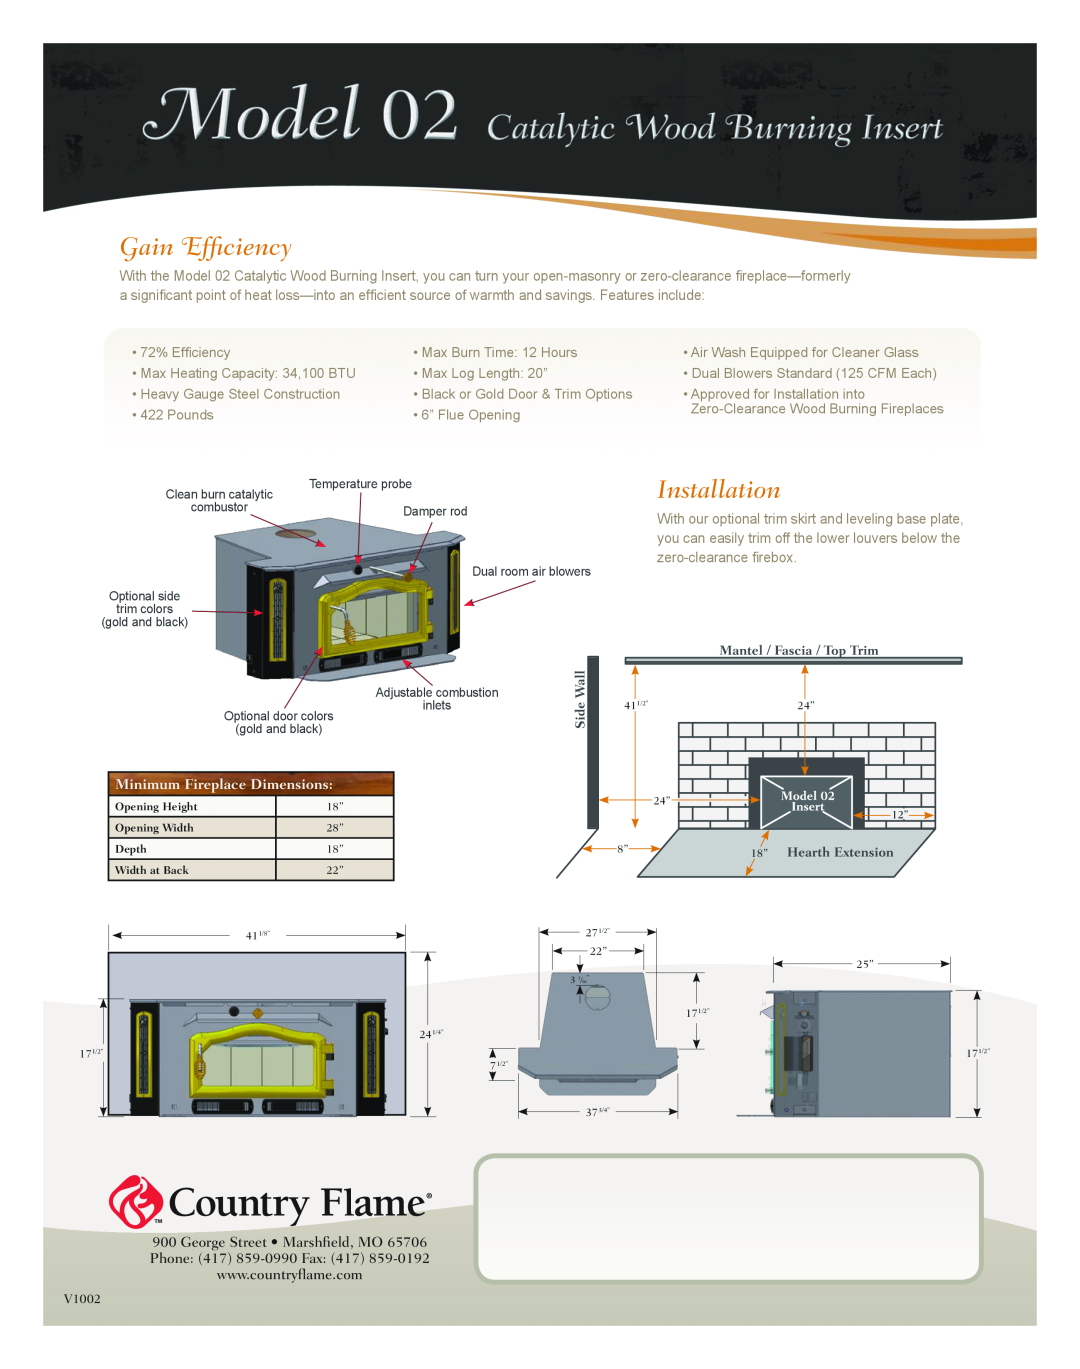 Country Flame O2 Gain Efficiency, Installation, Minimum Fireplace Dimensions, George Street Marshfield, MO, gold and black 